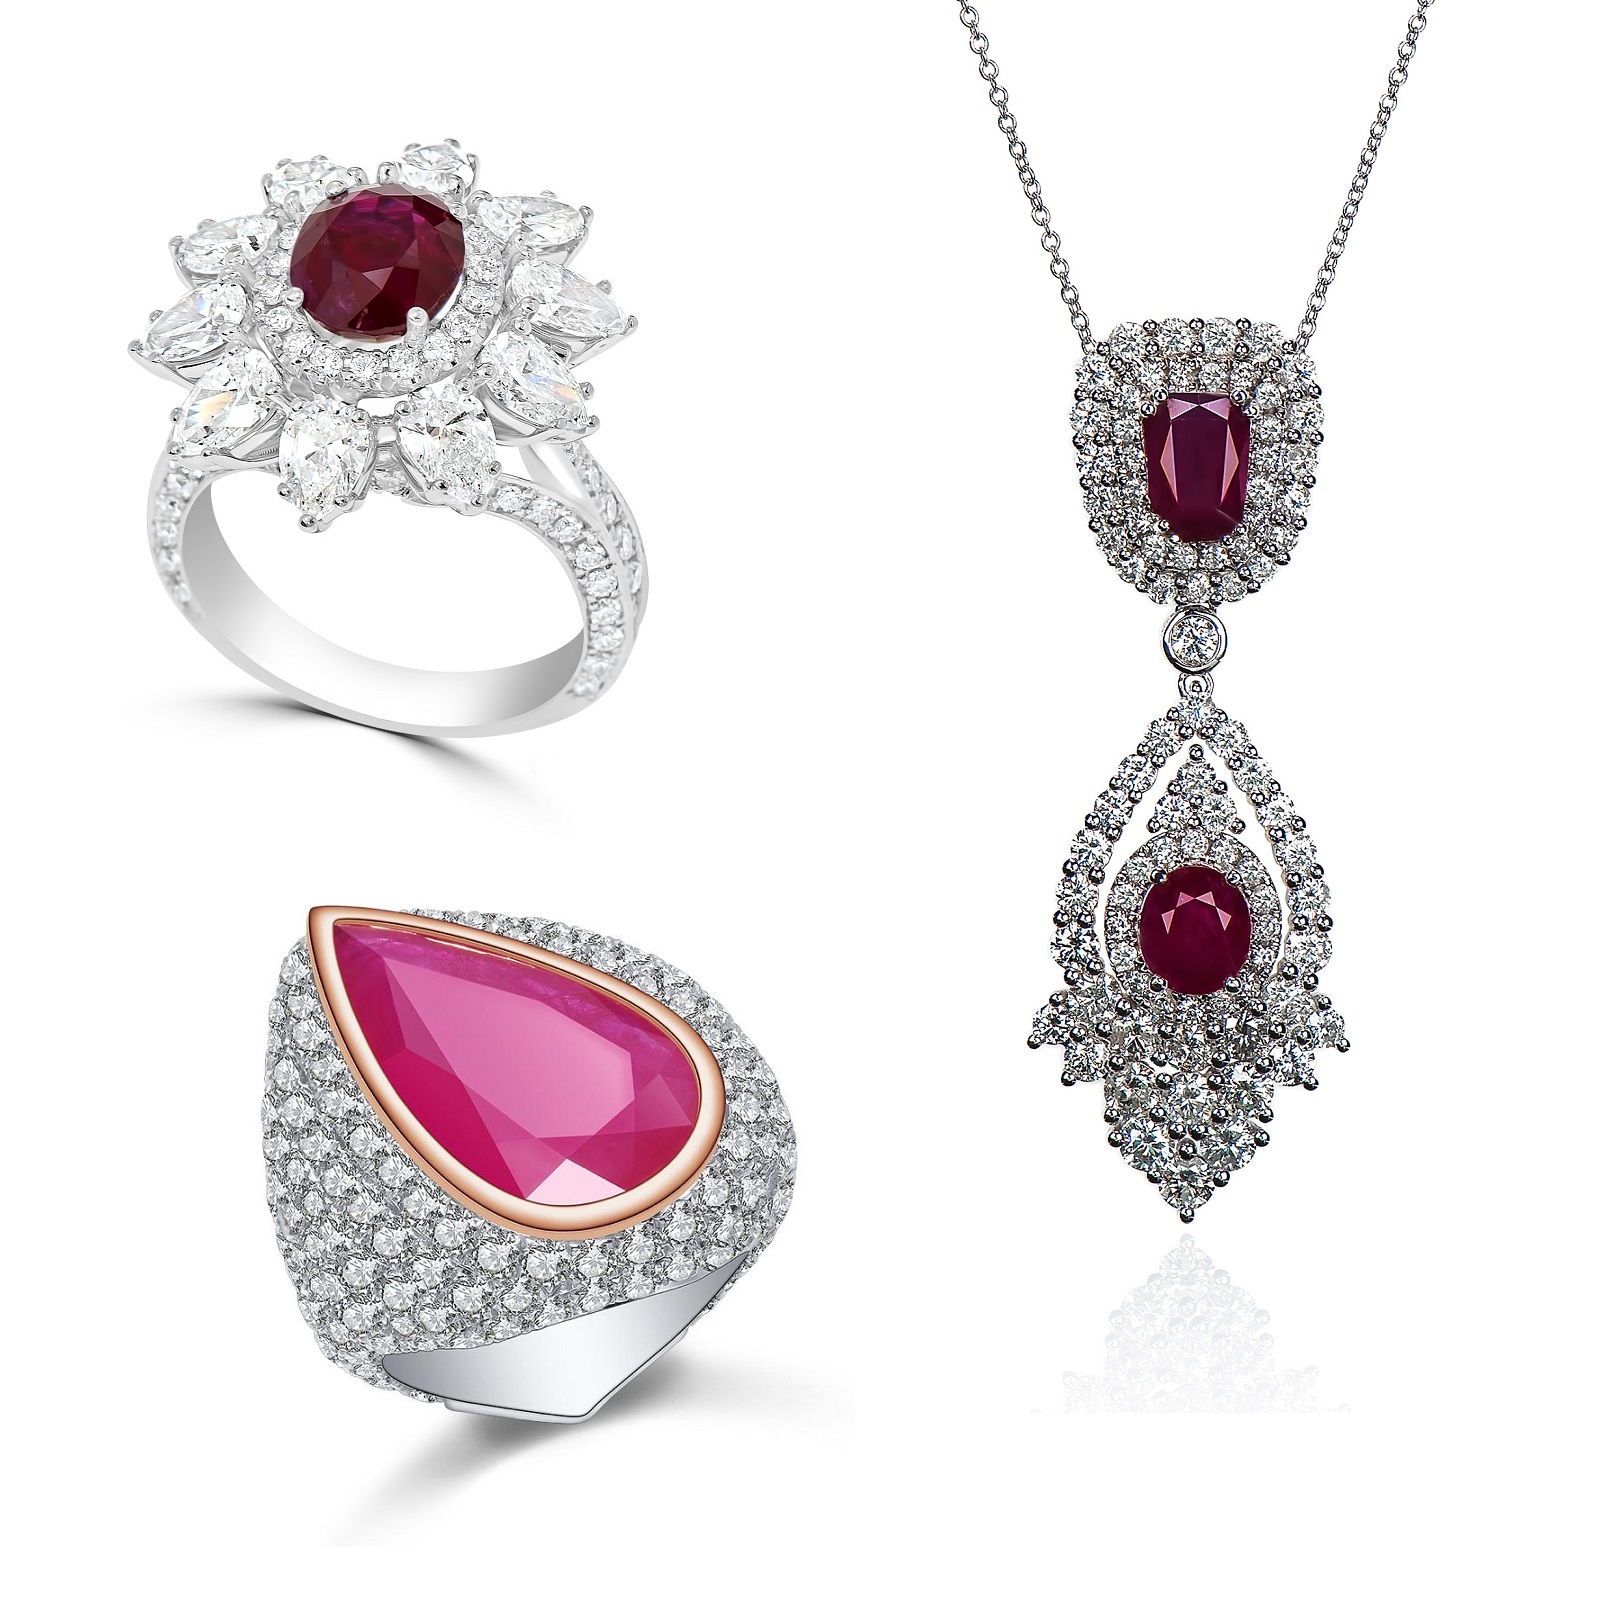 Gent’s Ruby & Diamond Ring with Lady’s Ruby & Diamond Ring & Pendant Set (32.36ct TW)